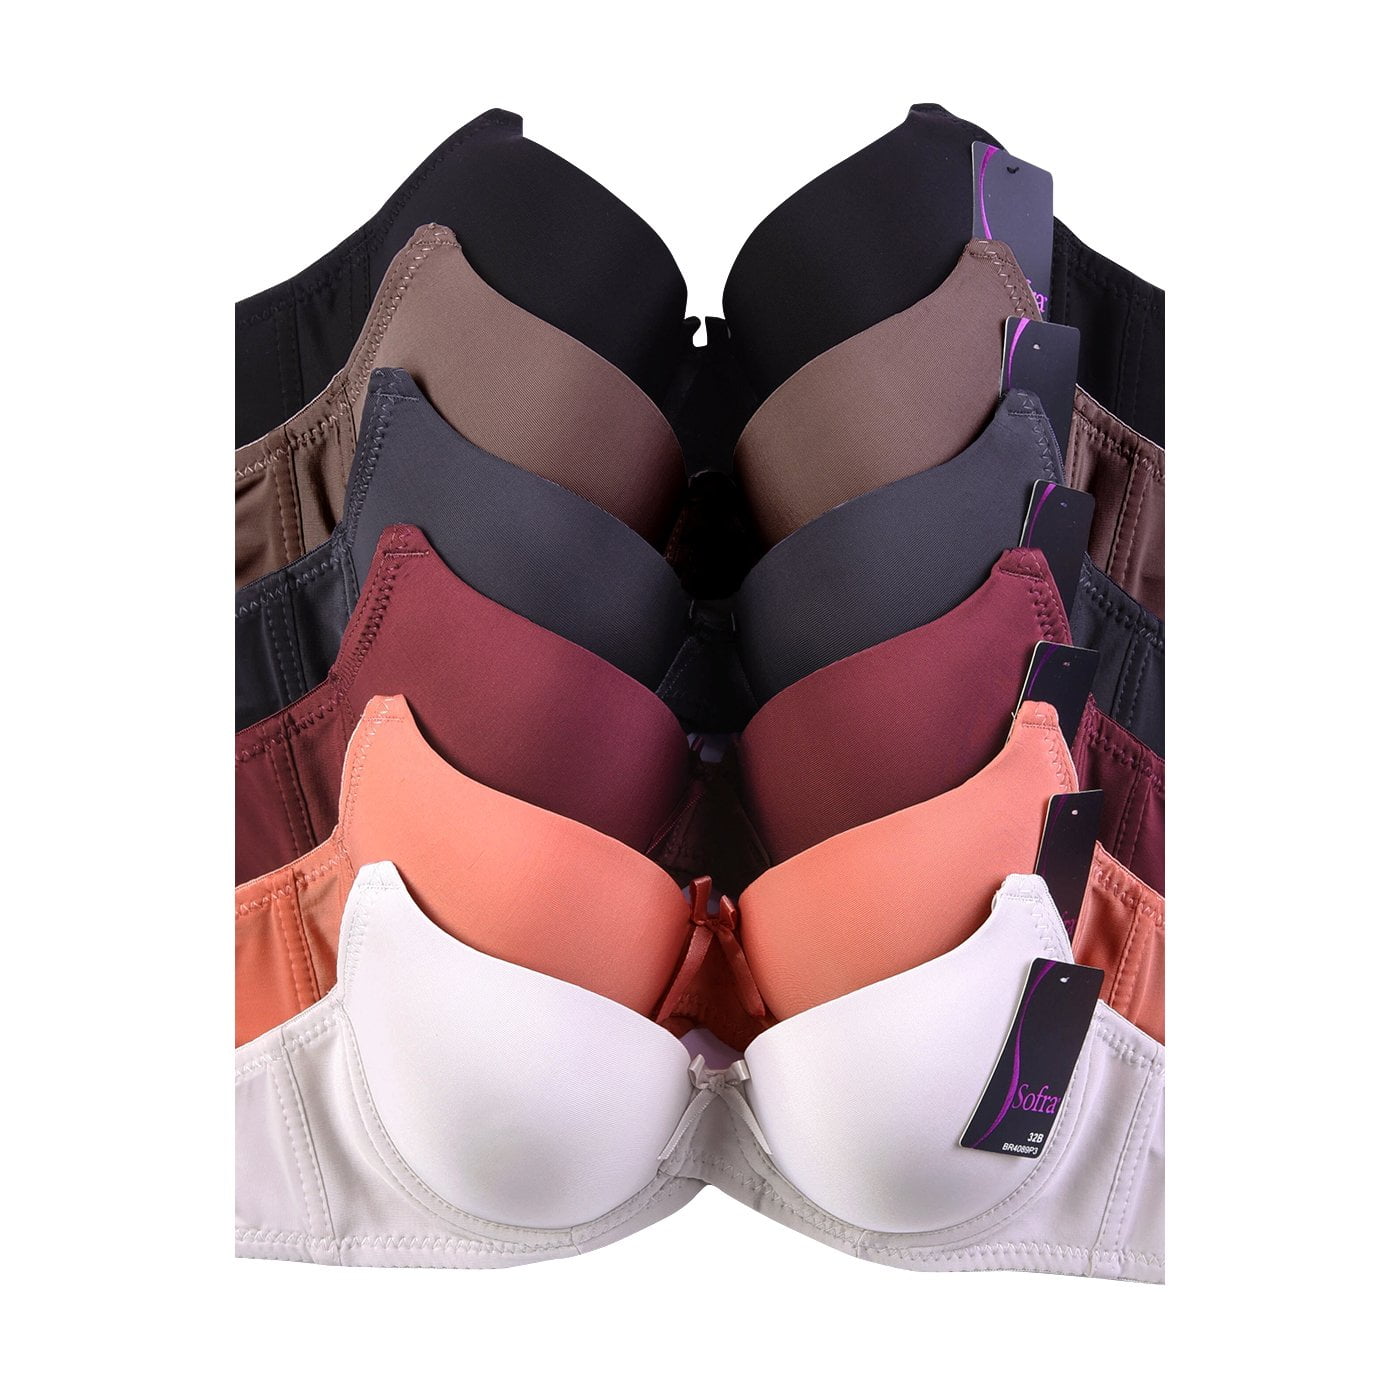 2ND DATE Womens Laced & Plain/Lace Bras Packs of 6 Various Styles